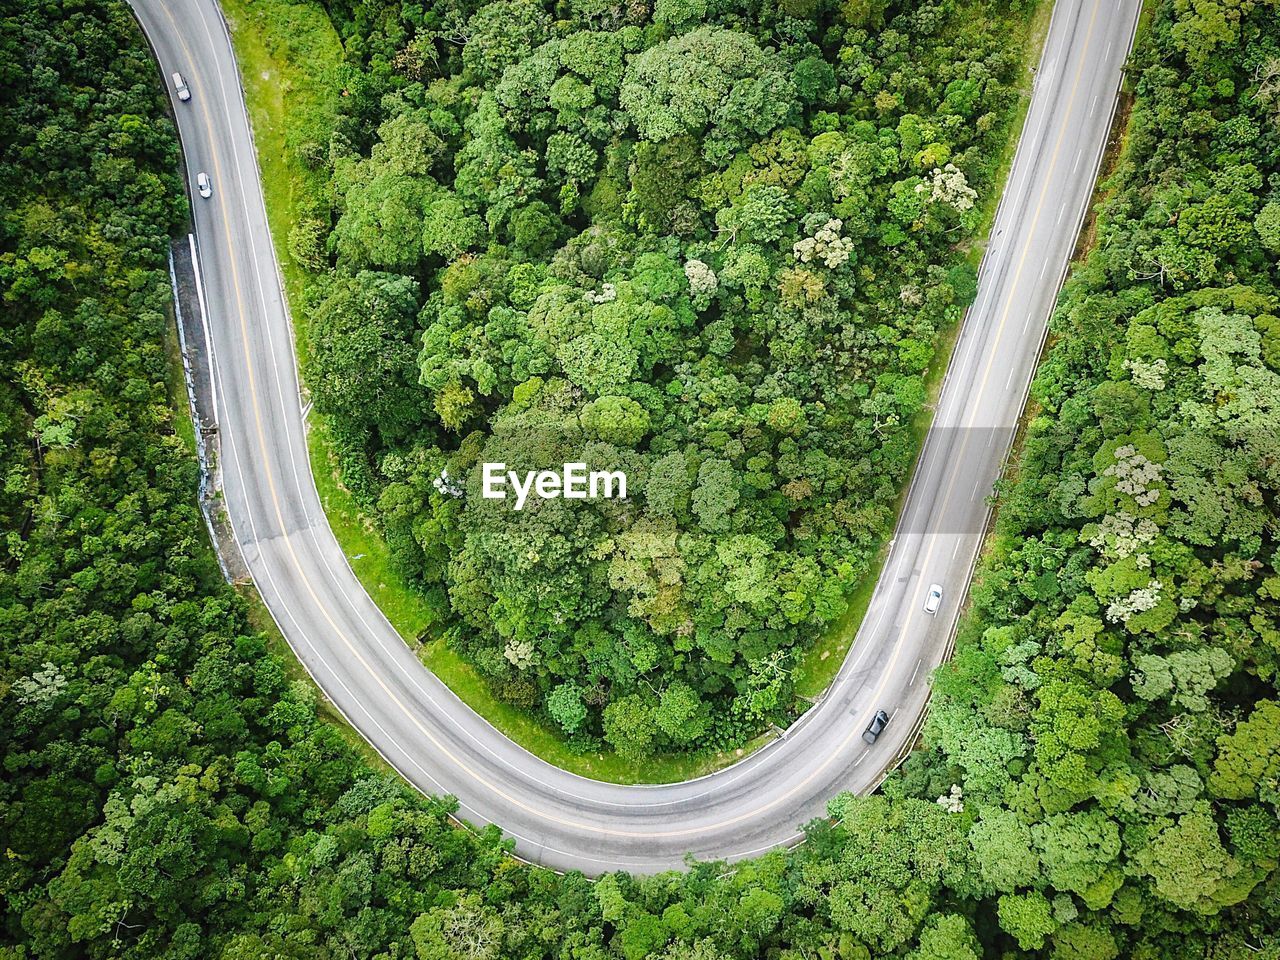 HIGH ANGLE VIEW OF TREES AND PLANTS GROWING ON LAND